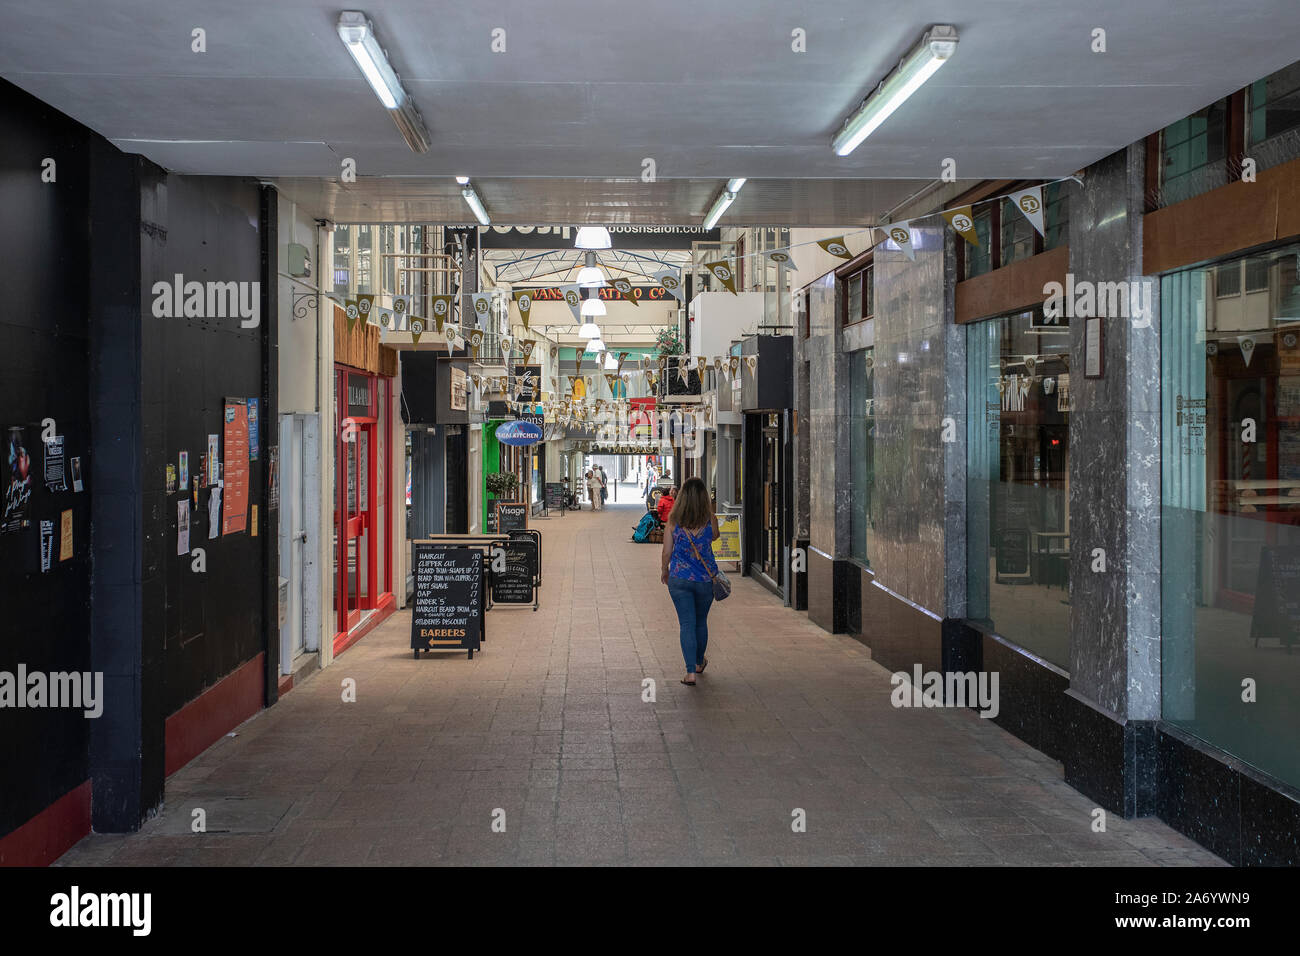 Pictured: A general view of Picton Arcade in Swansea city centre, Wales, UK.  Friday 12 July 2019  Re: General view of Swansea city centre, Wales, UK. Stock Photo